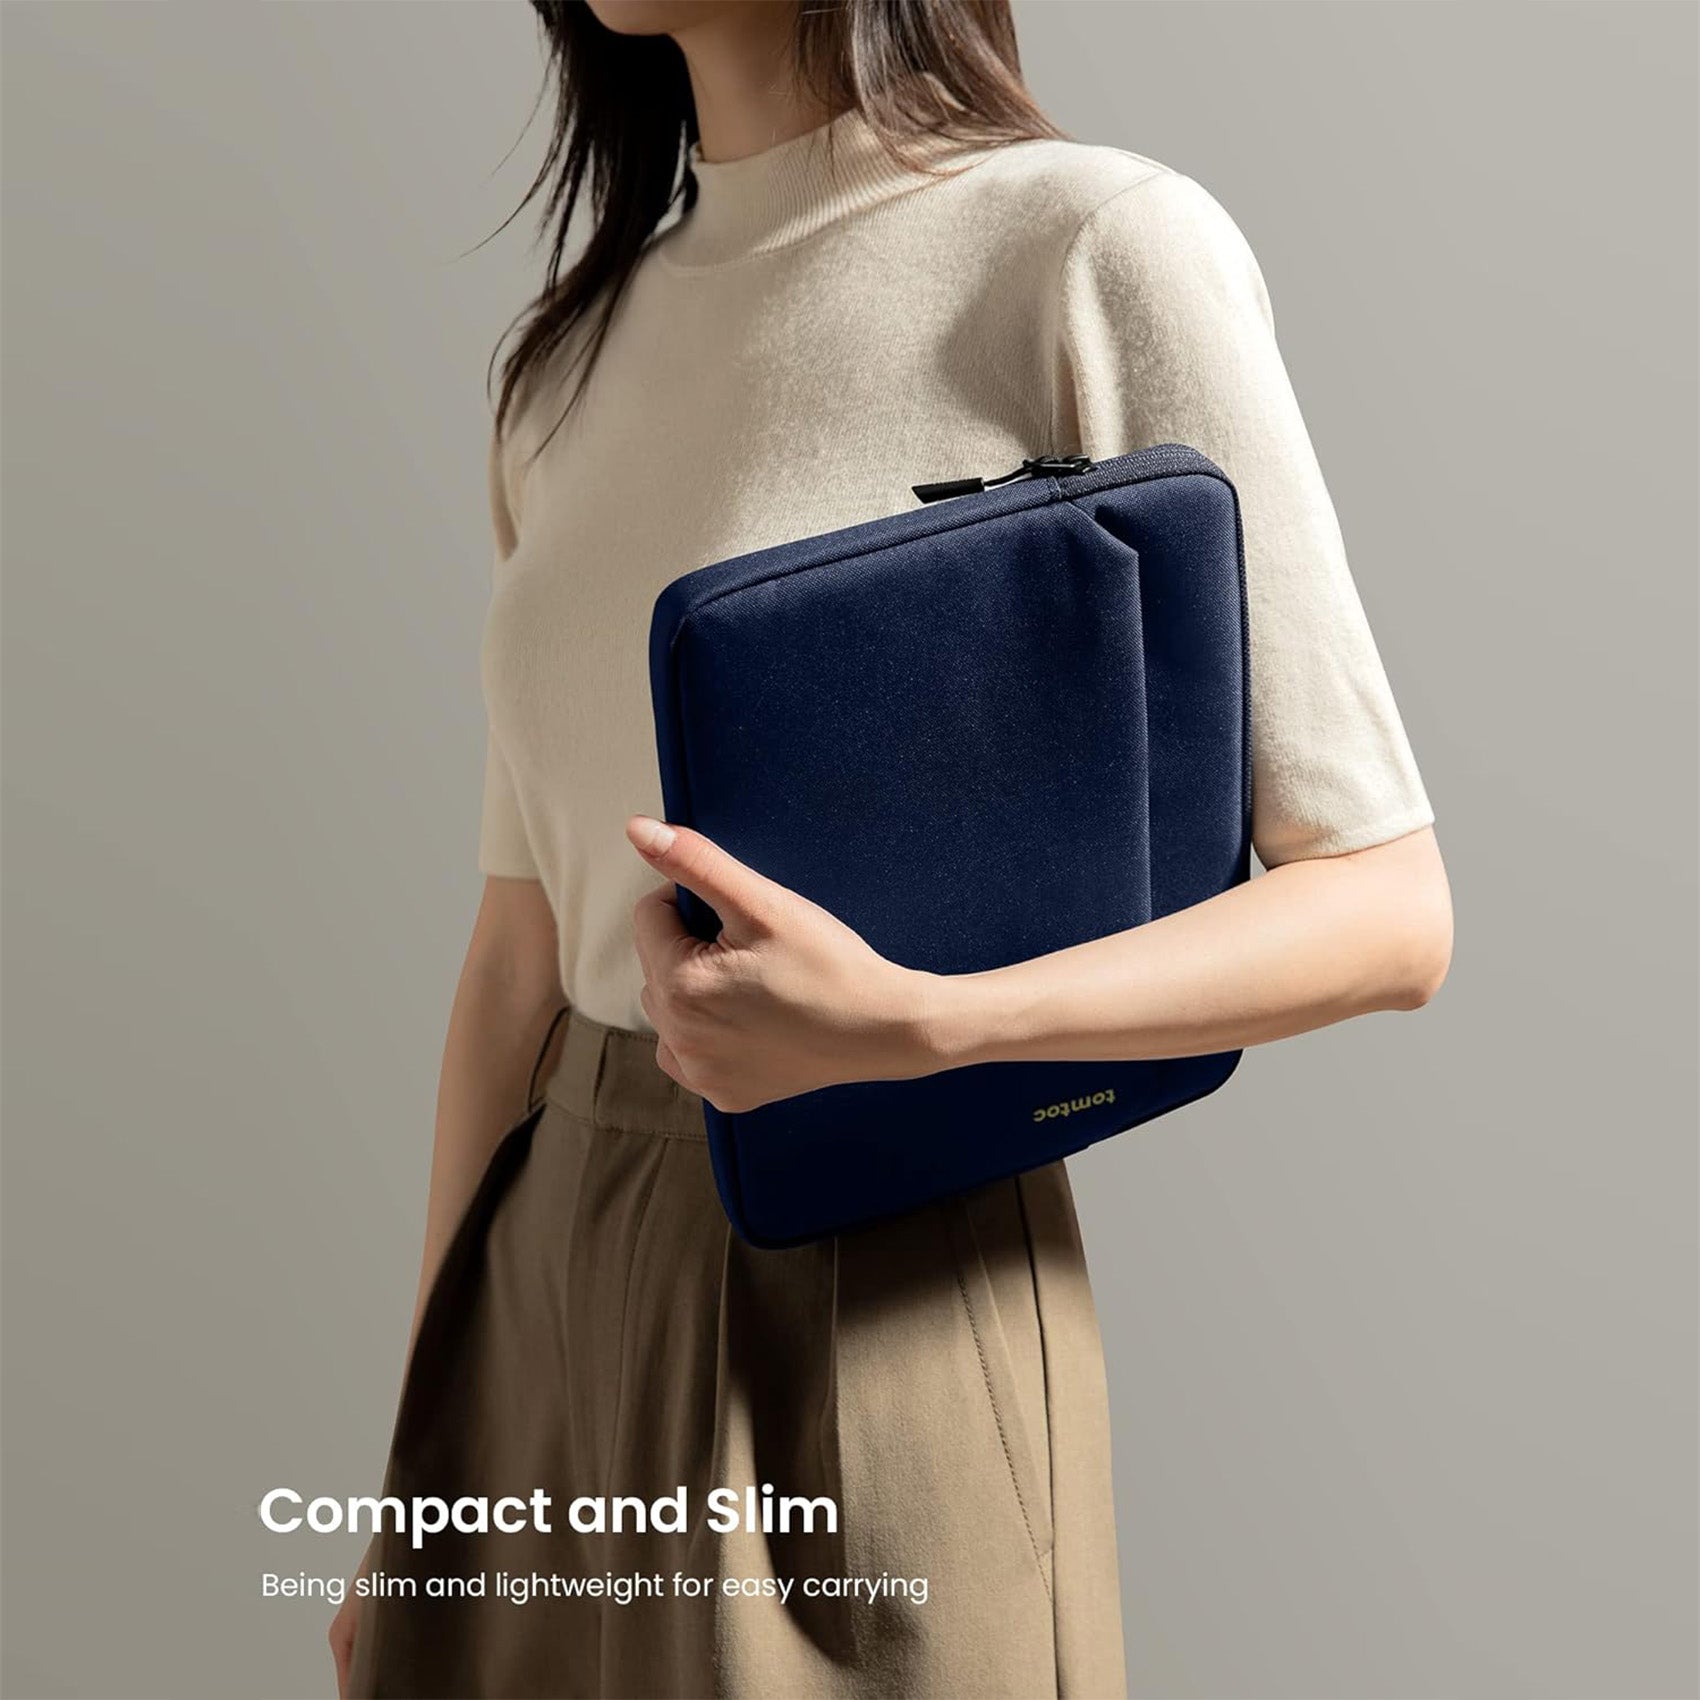 tomtoc 12.9 Inch Tablet Sleeve Bag - Navy Blue